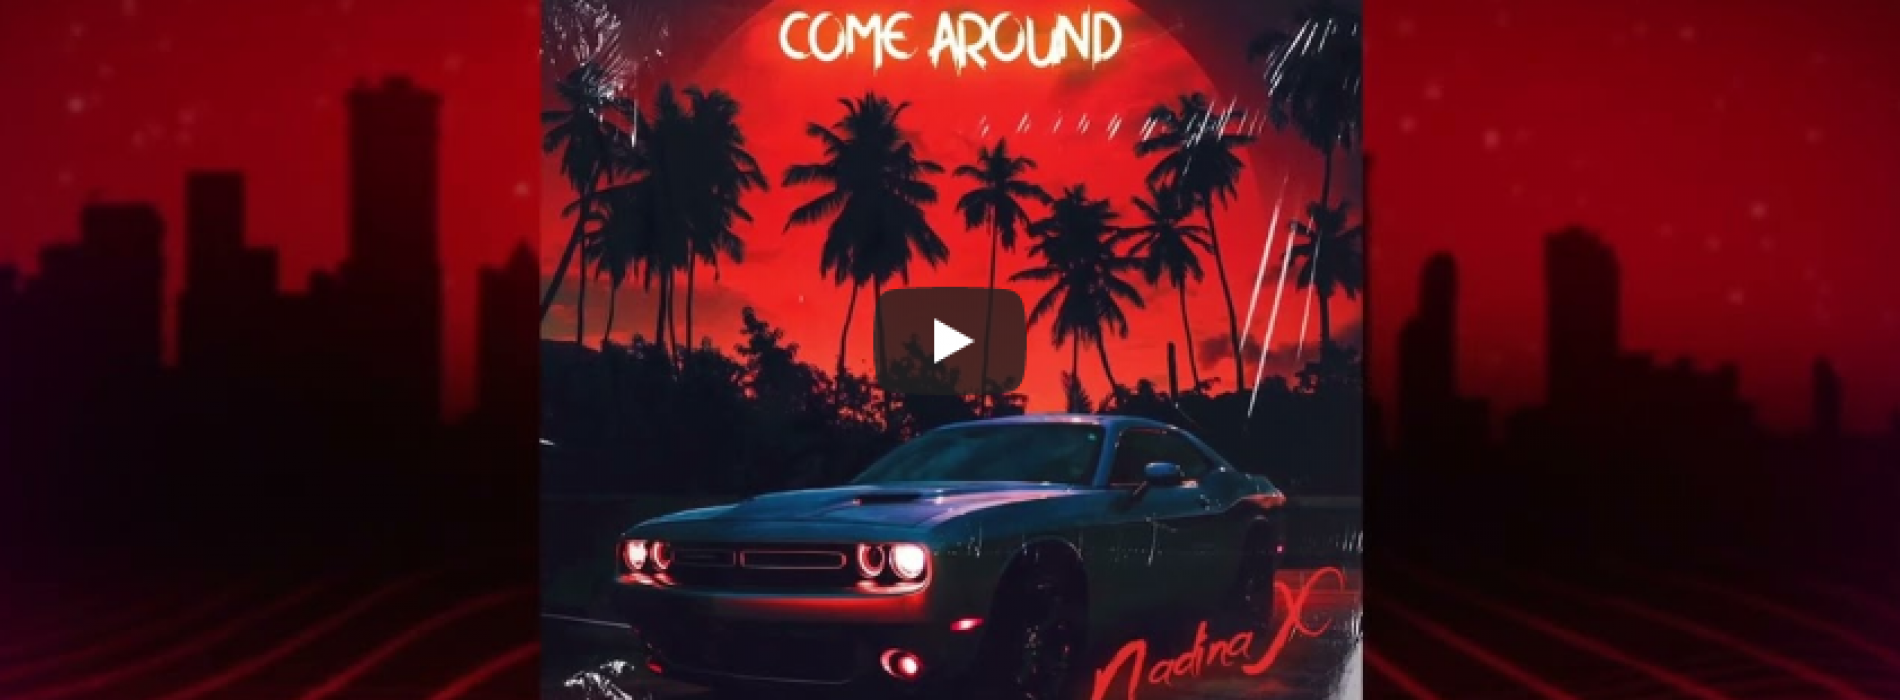 New Music : Nadina X – Come Around (Official Audio)